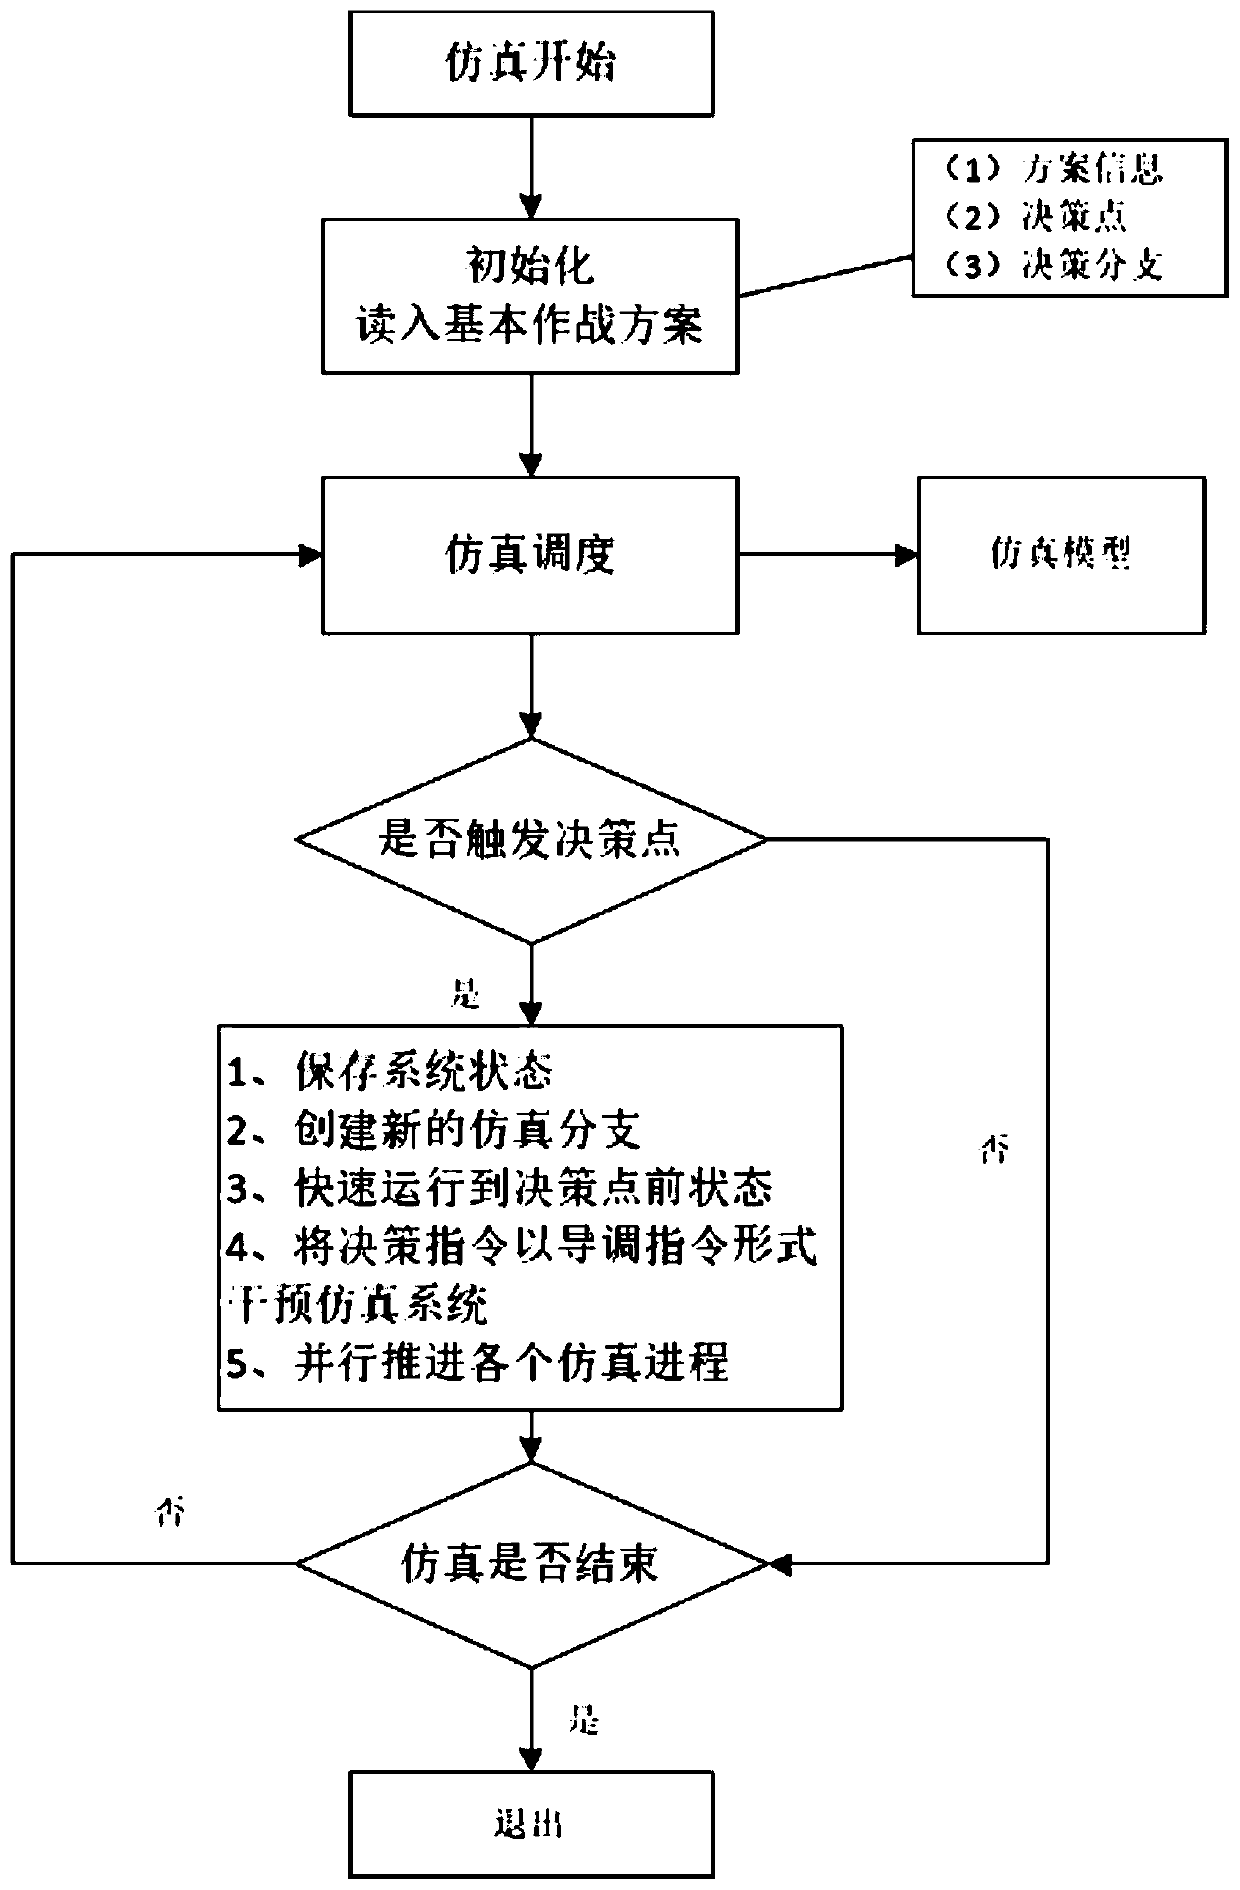 Combat simulation scheme design and operation method based on decision point and branch simulation